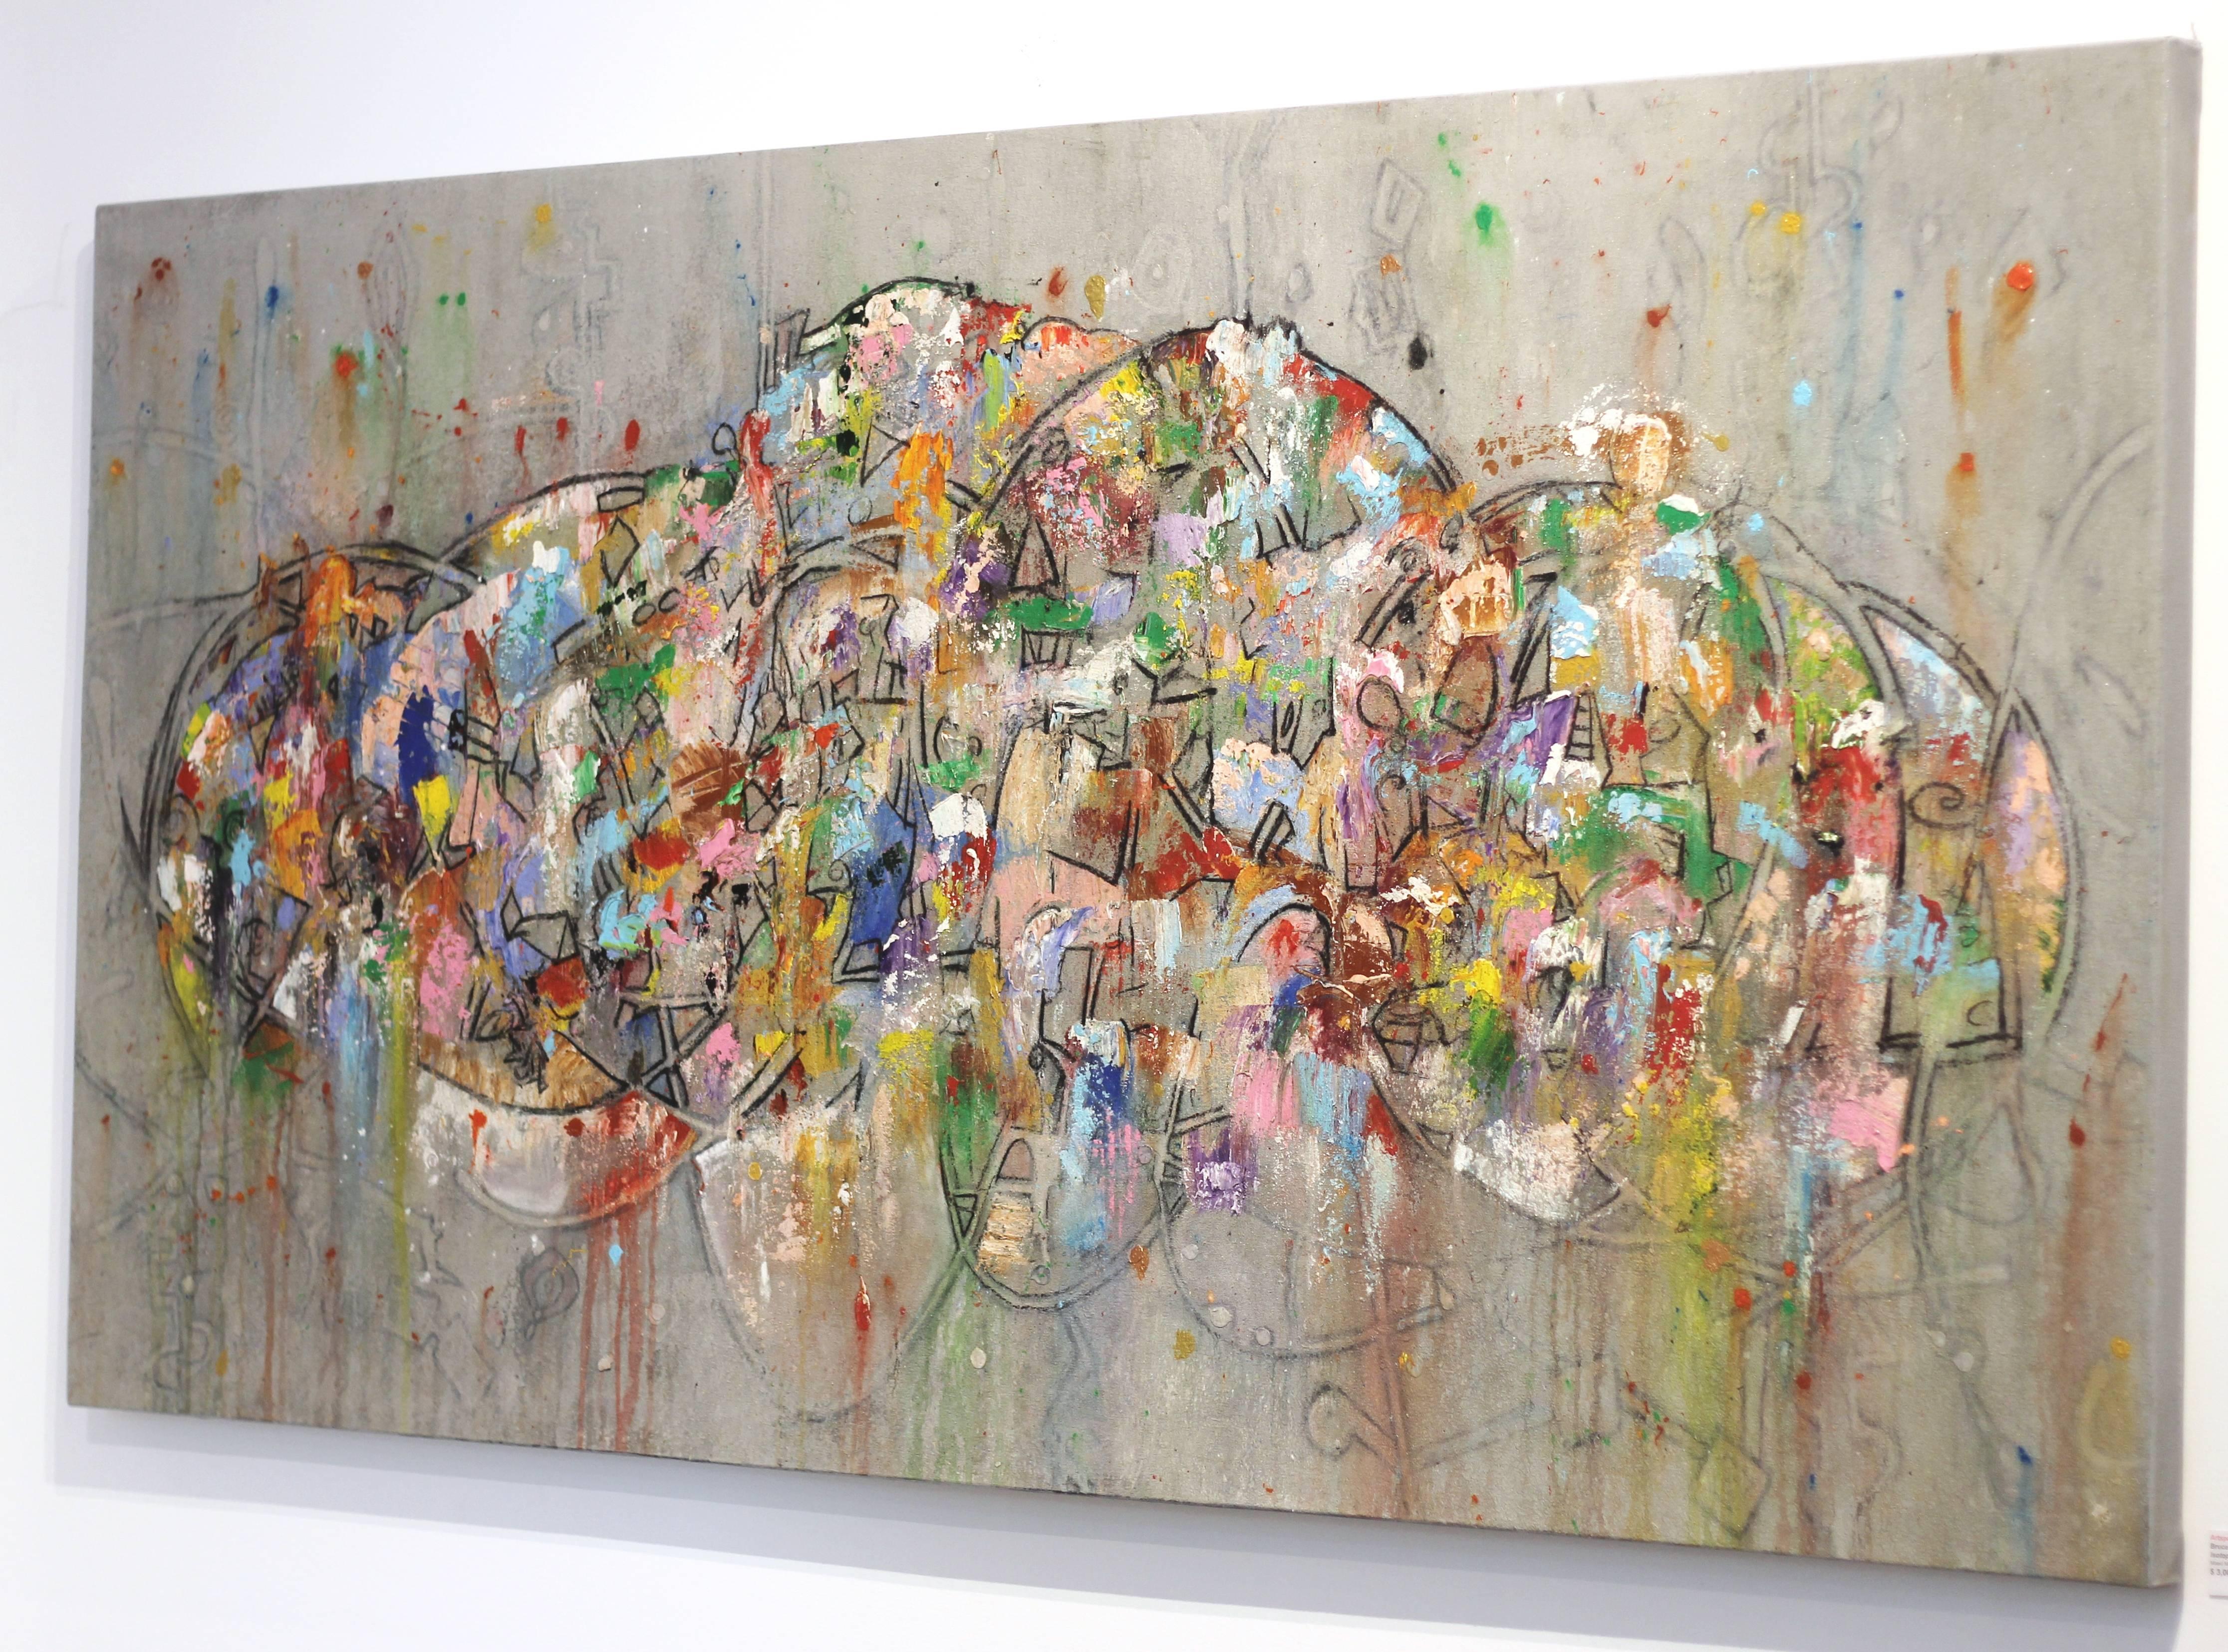 Bruce Rubenstein specializes in large-scale artworks, using huge canvases to tell his stories. This one-of-a-kind  35 inch tall by 67 inch wide original artwork is a mixed media composition layered with acrylic paint, oil stick and enamel on canvas.